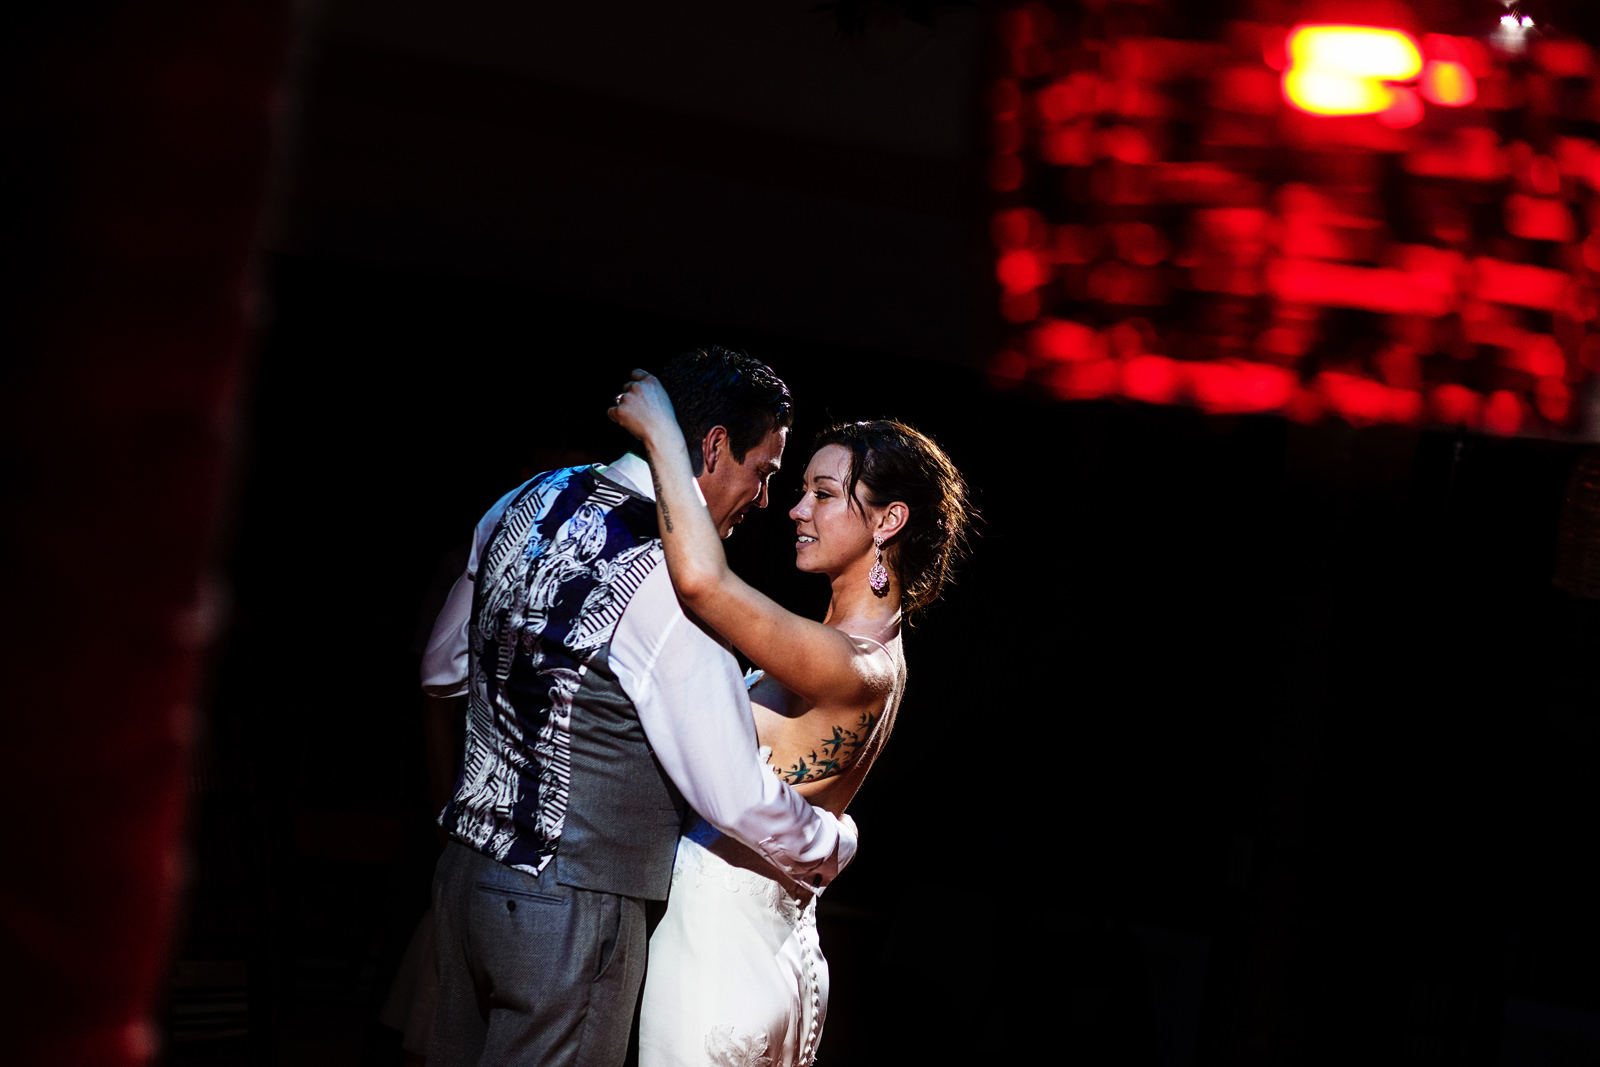 Bride and groom first dance through a column and a red lamp